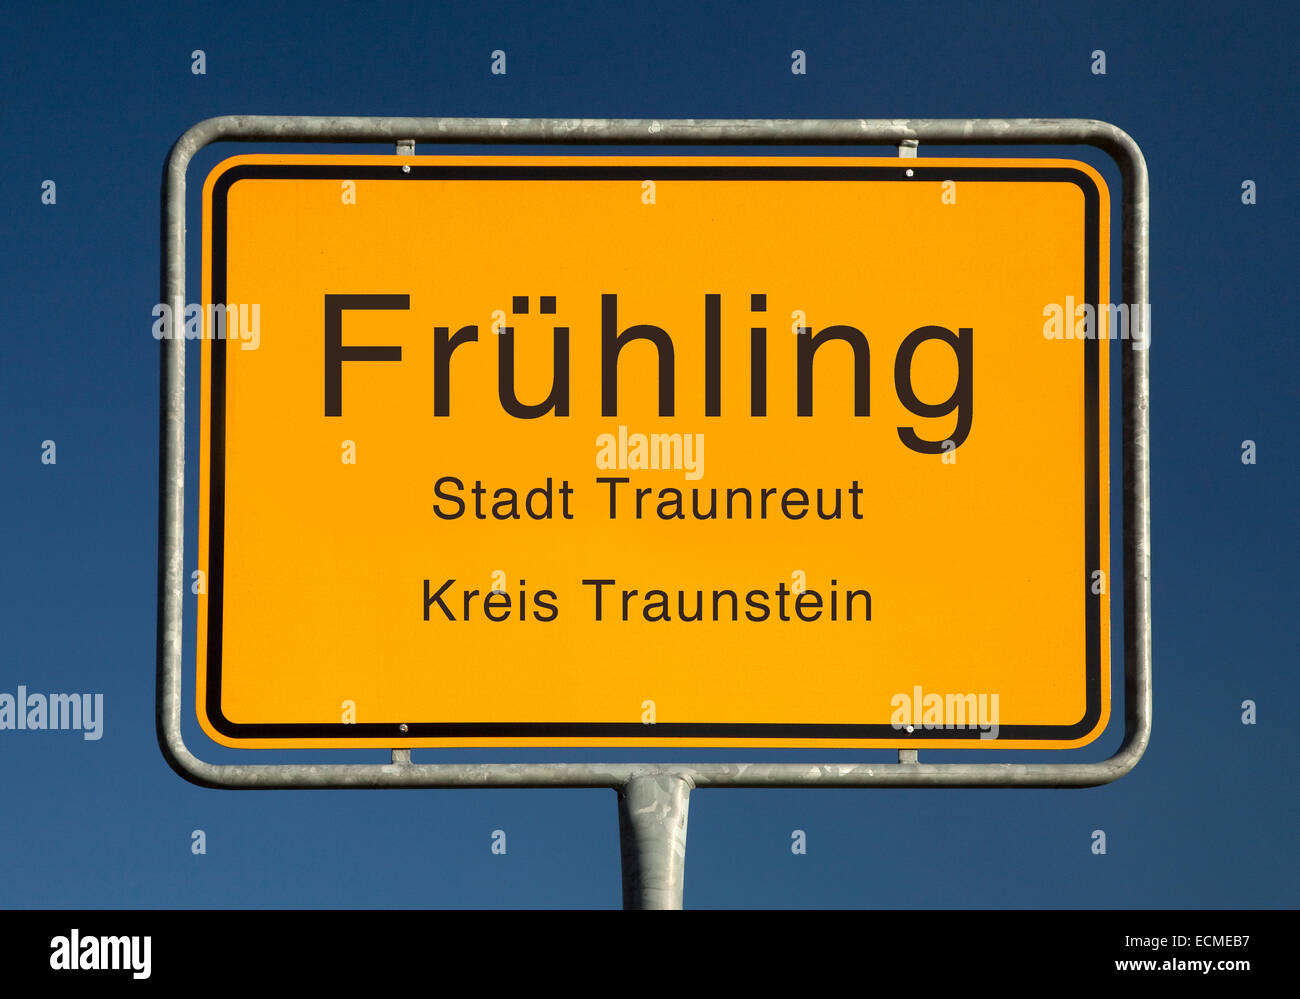 City limits sign, Frühling or spring, Traunreut, district Traunstein, Bavaria, Germany Stock Photo